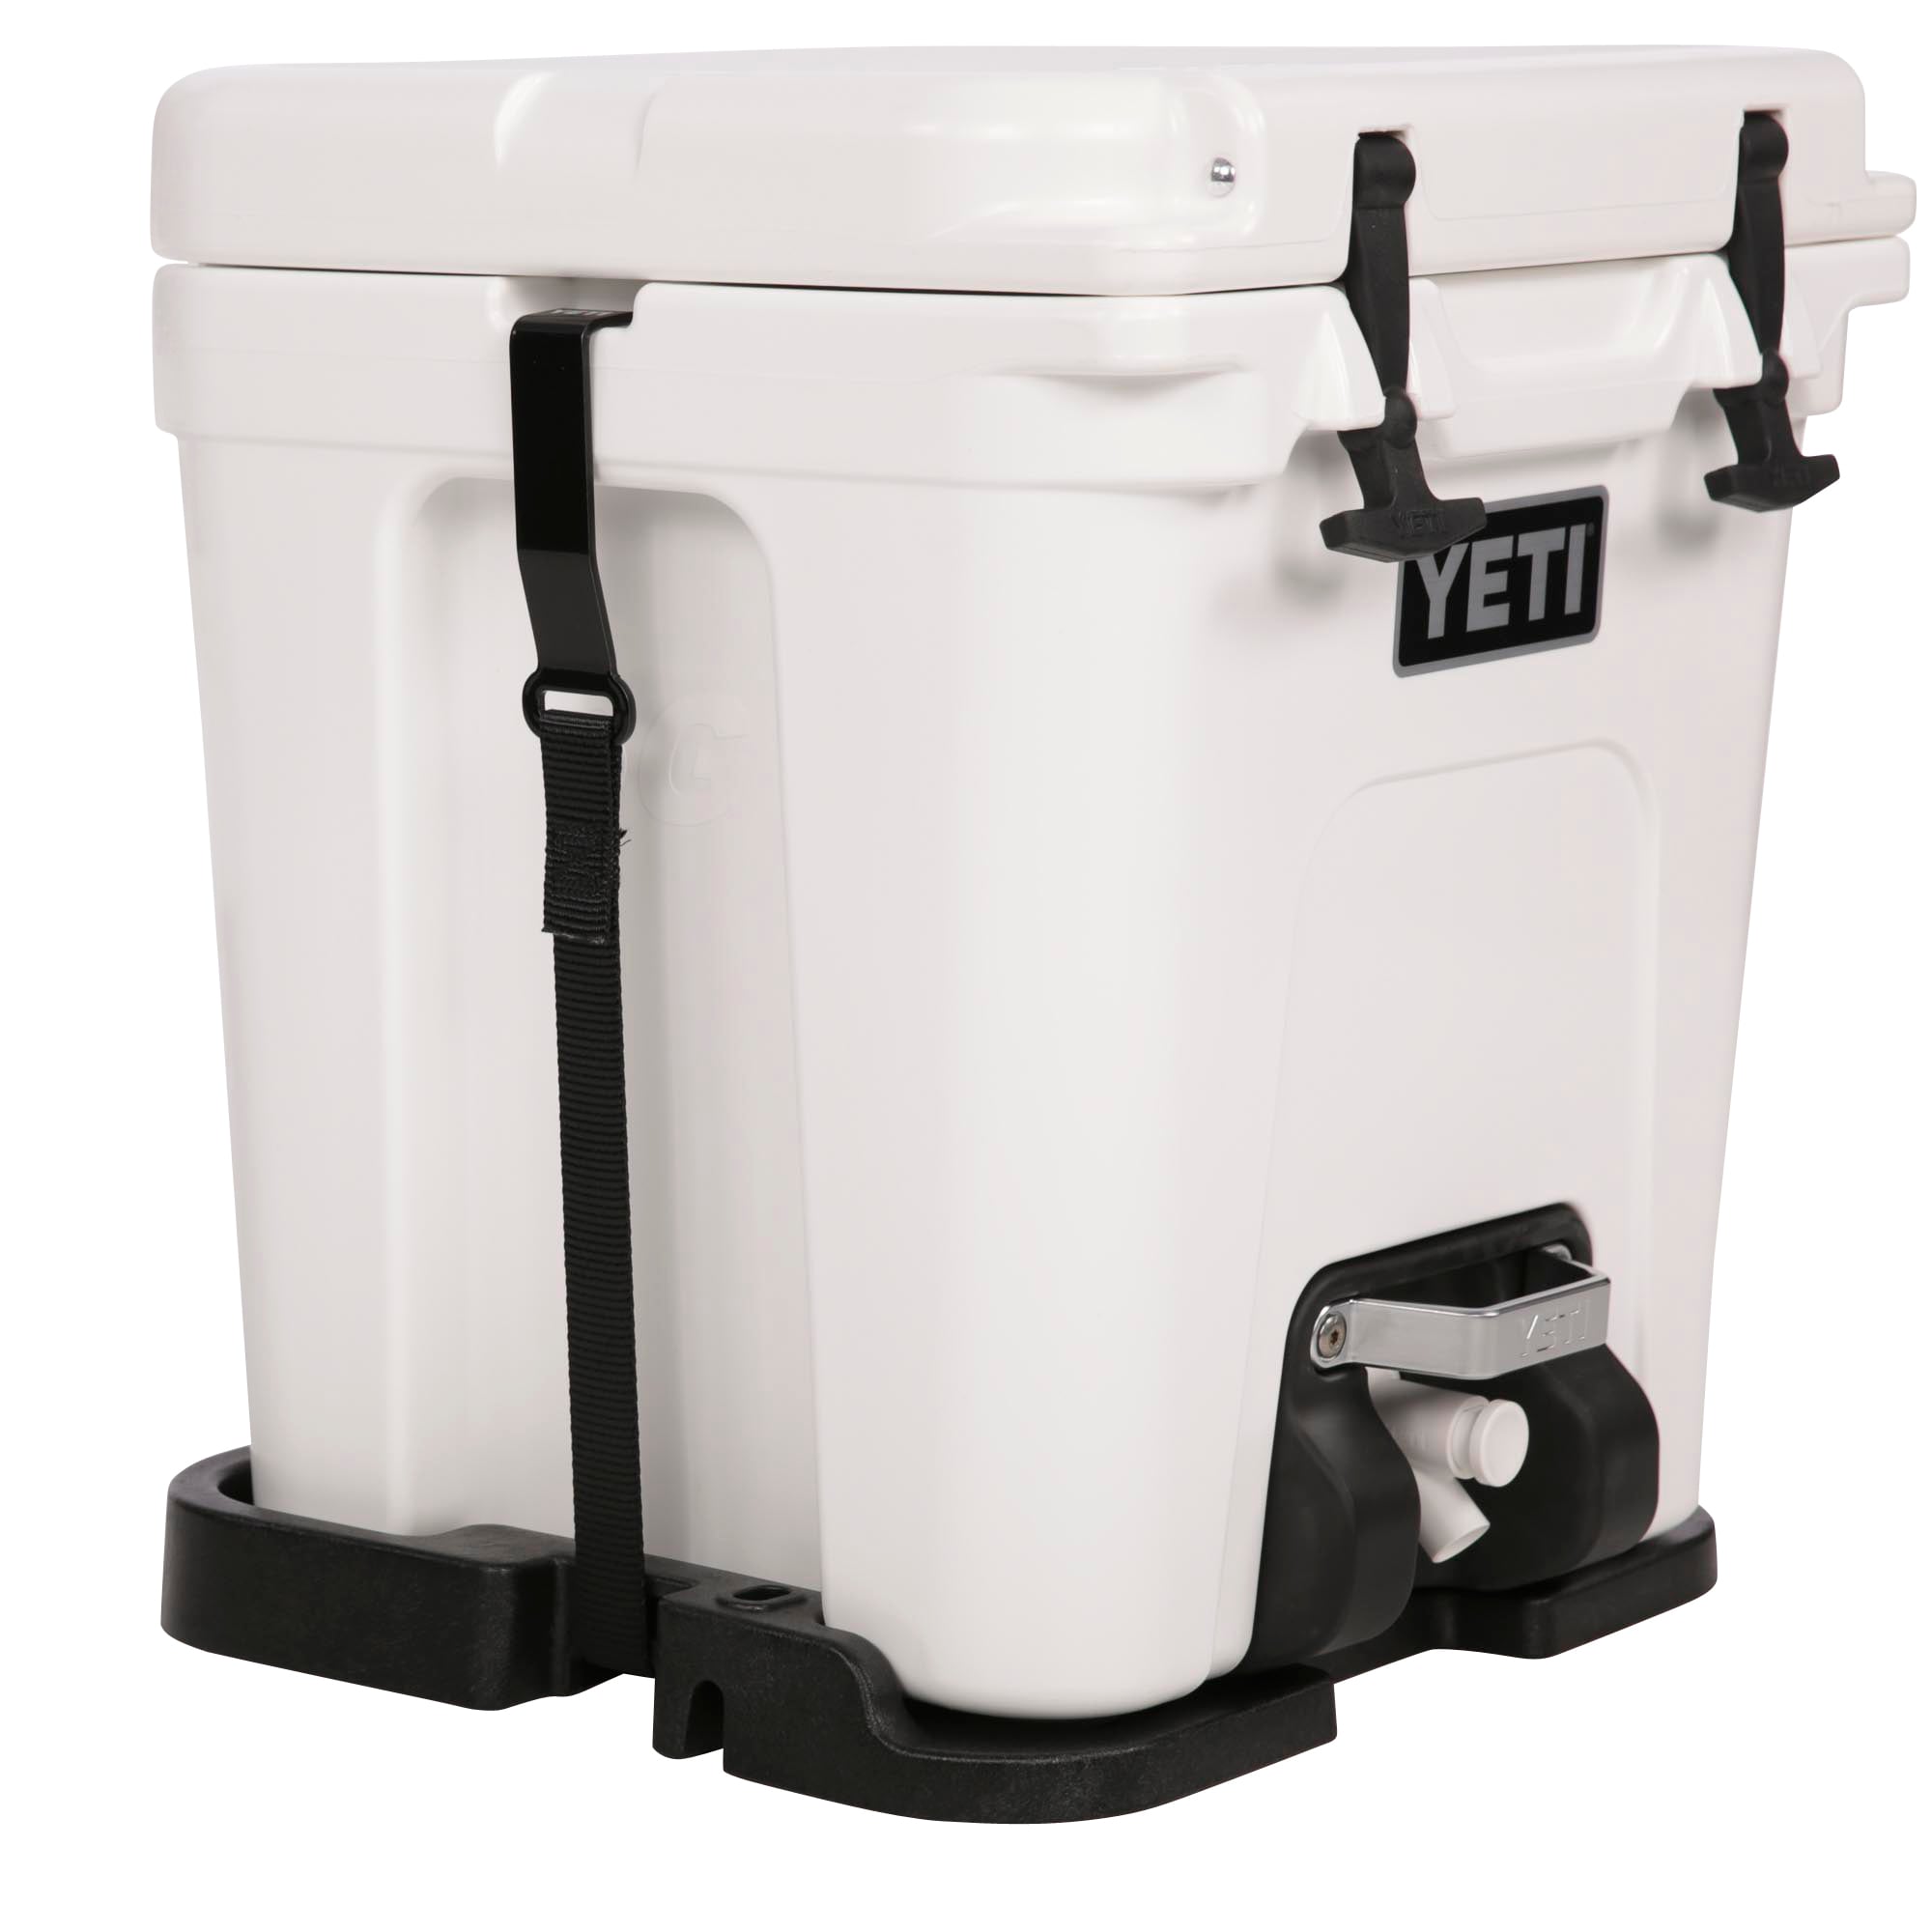 YETI Silo 6-Gallon Beverage Cooler Mount Accessory at Lowes.com